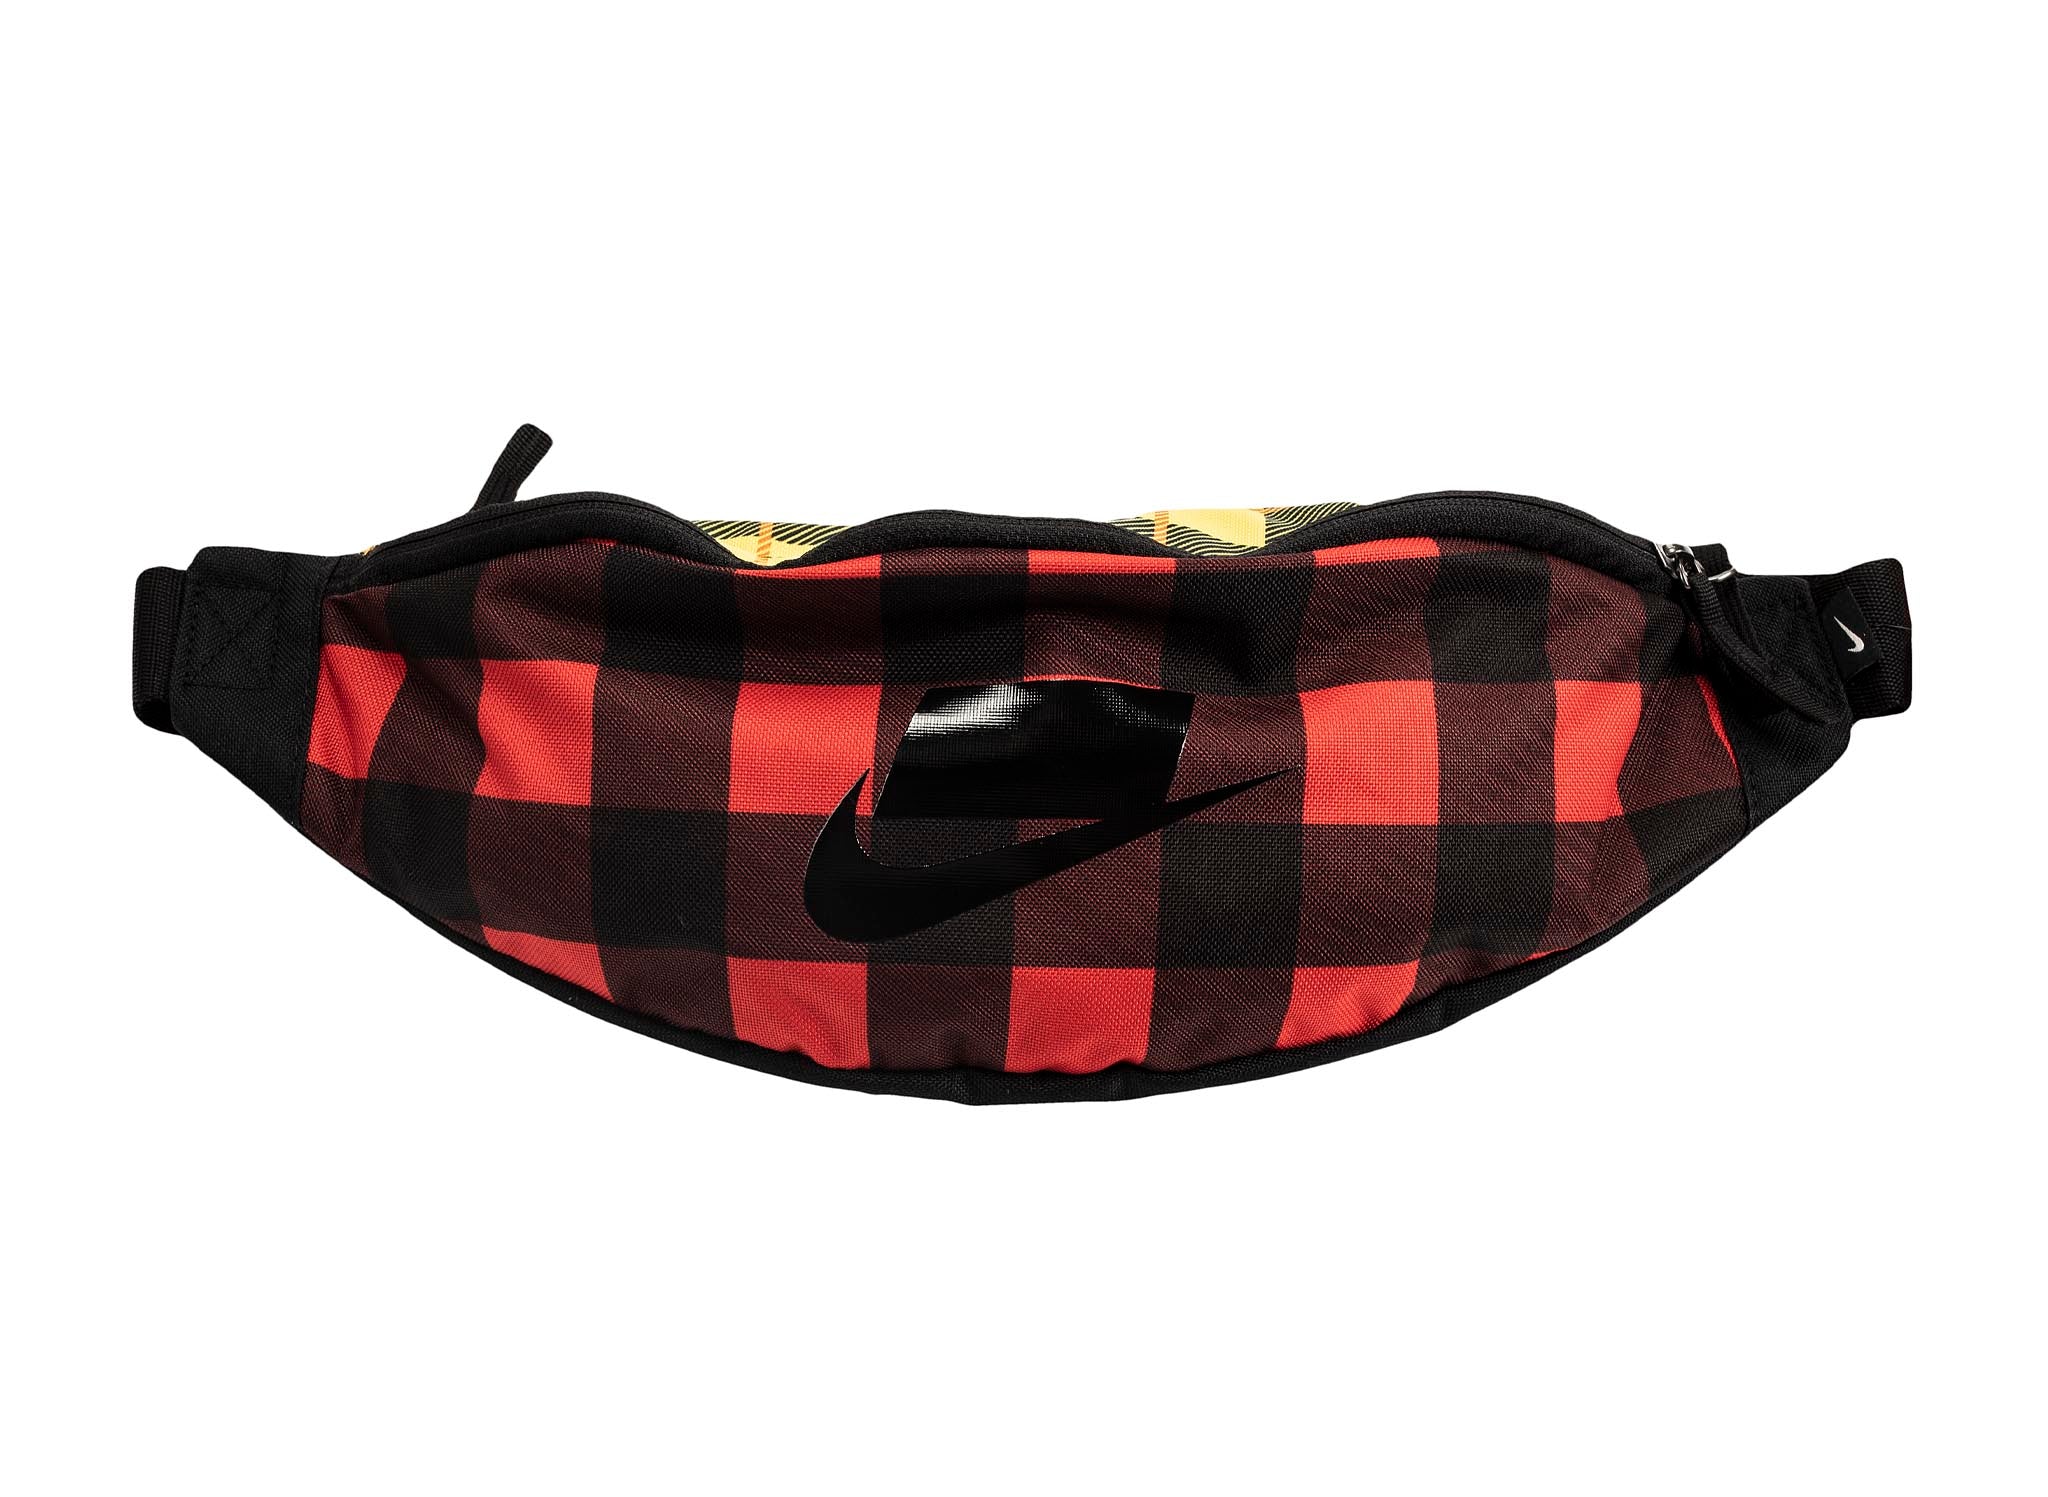 red and black nike fanny pack